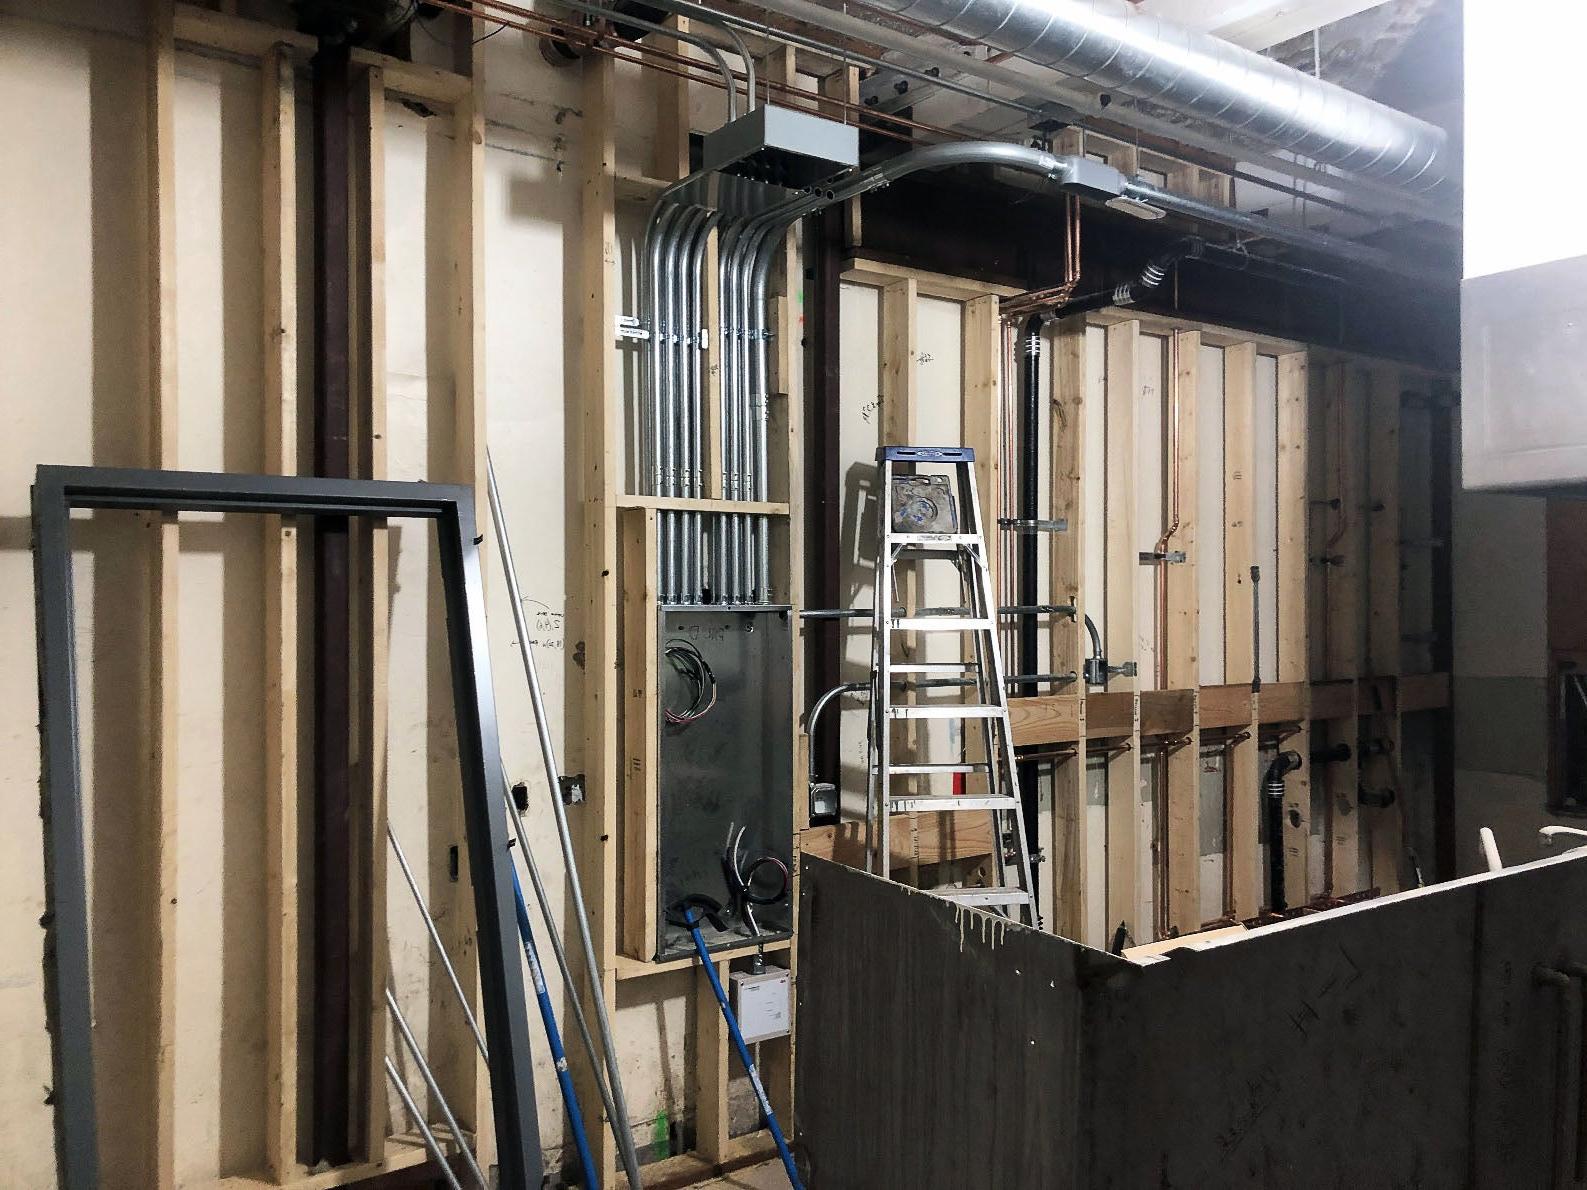 wood framing is open to the room with wallboard on the back side of it. piping, ducts, and electrical conduit can be seen in the walls